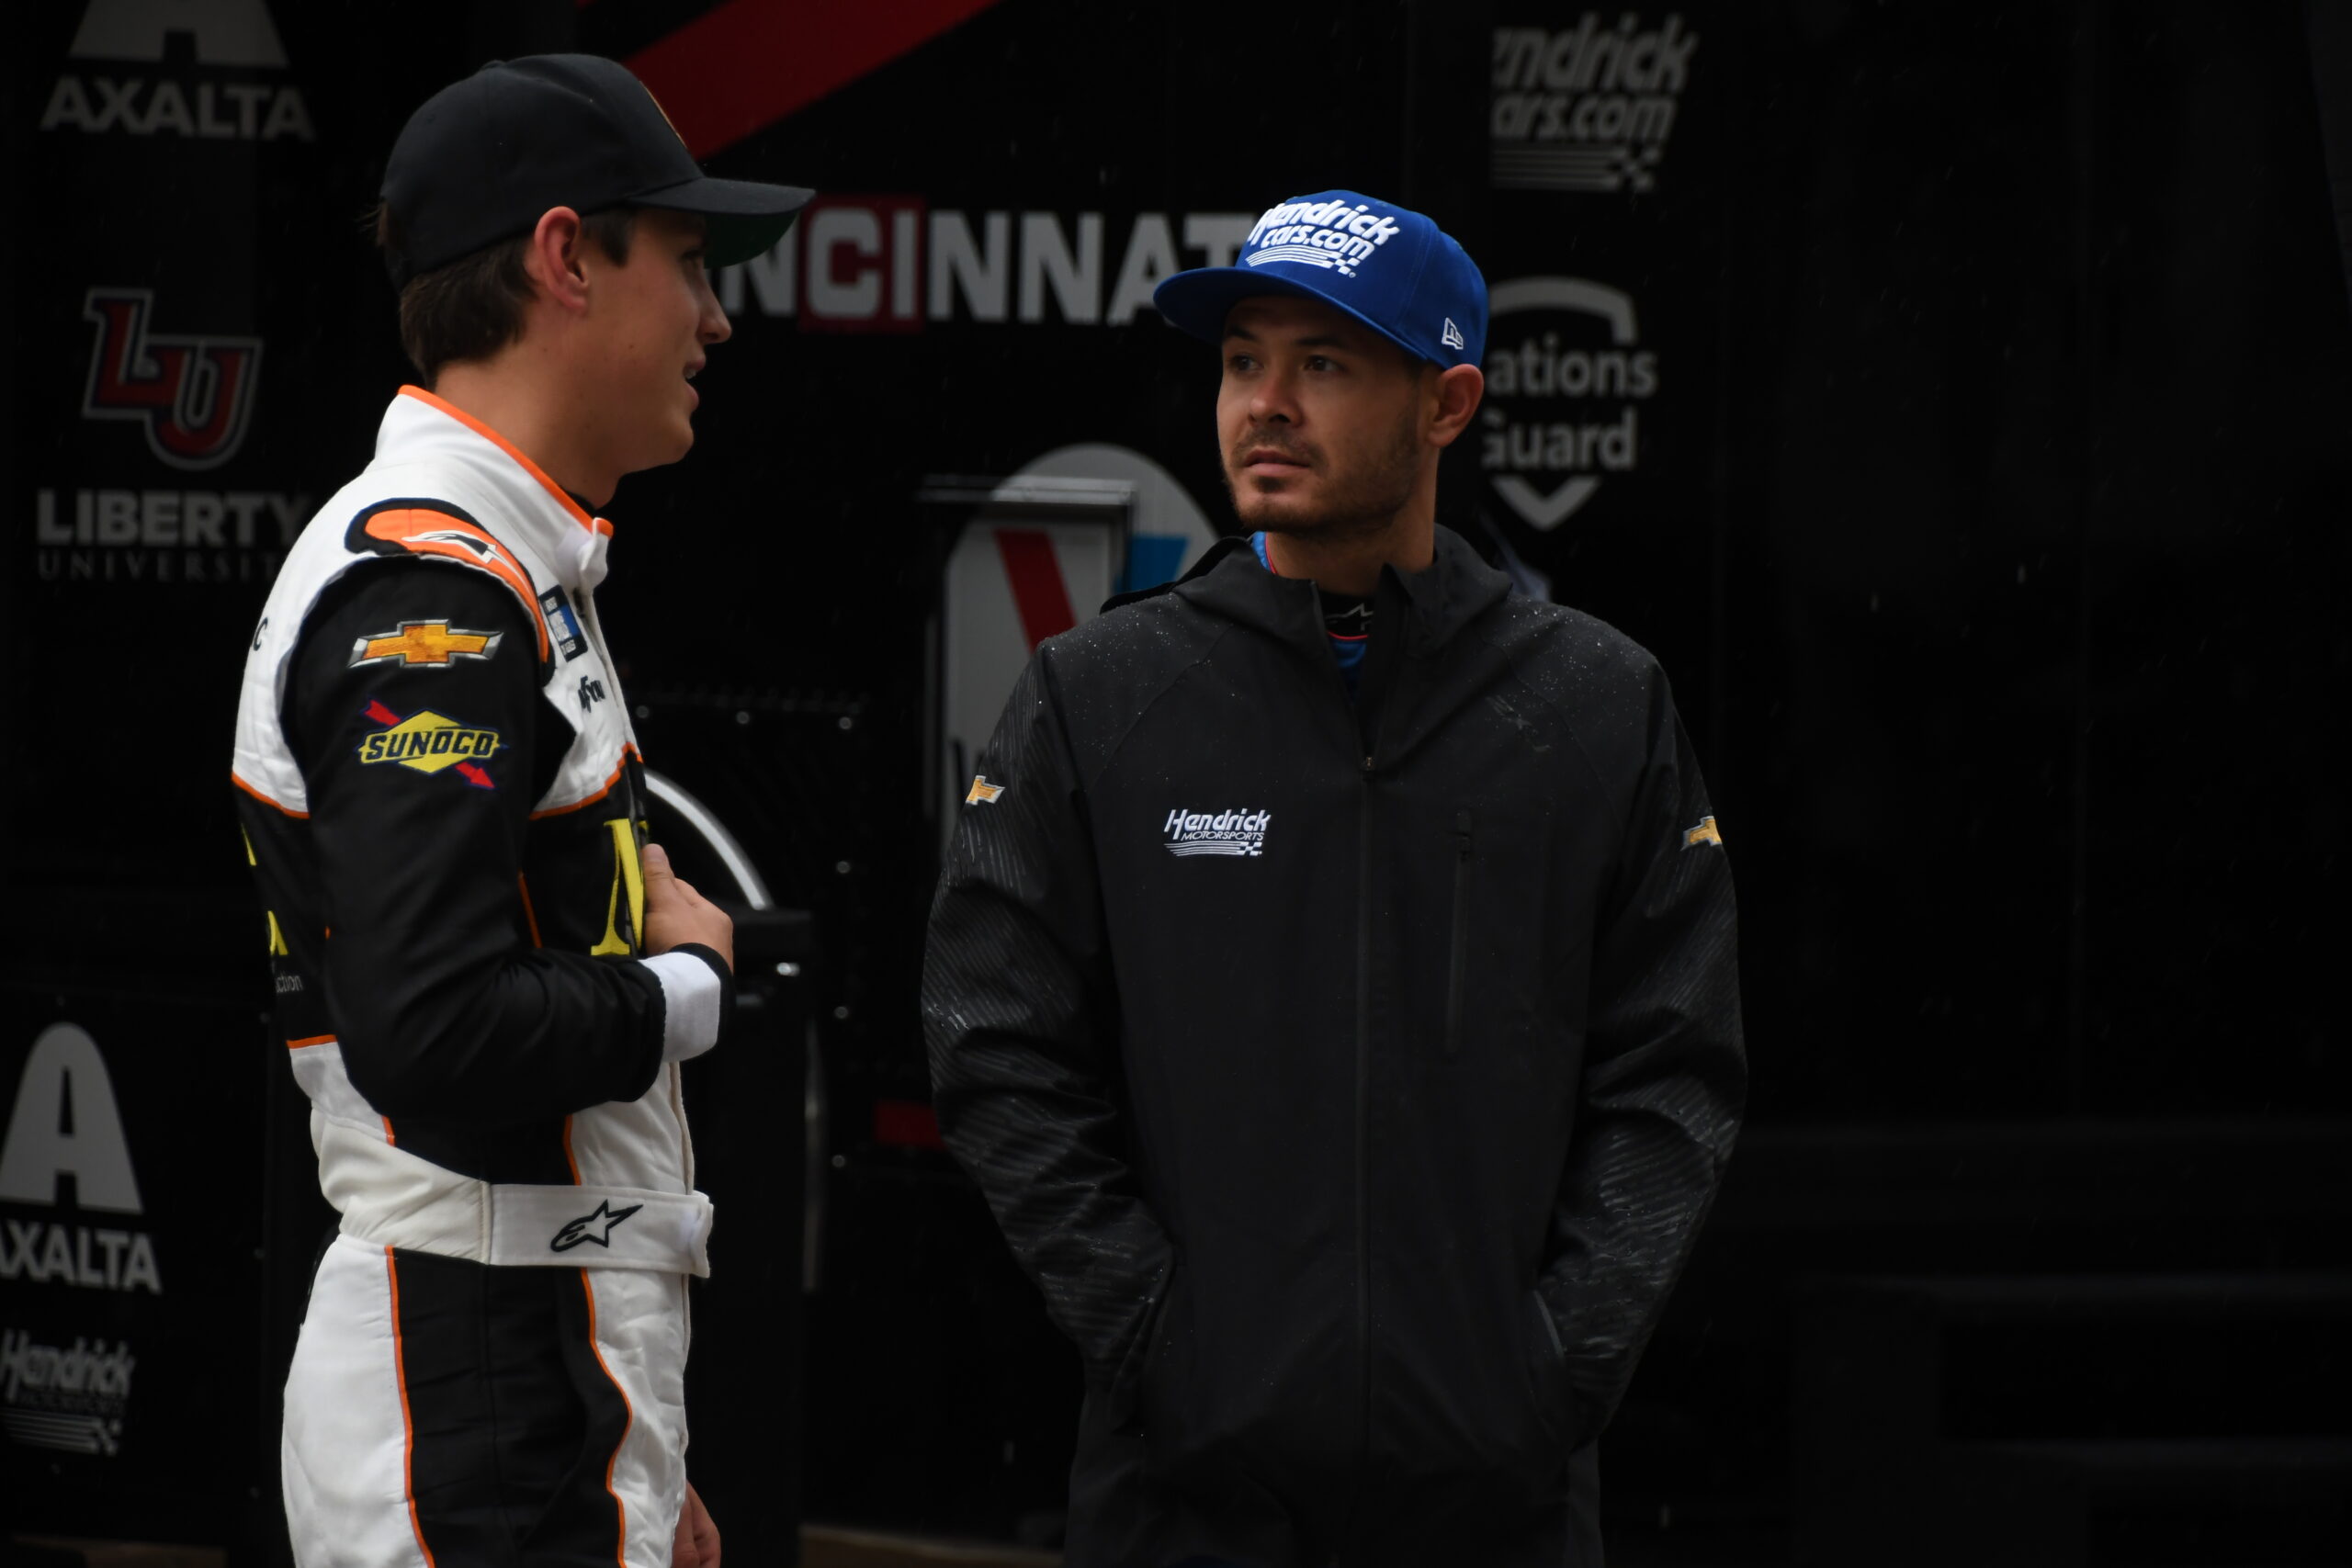 Imagine being a fly near the hauler with this engrossing conversation between Zane Smith and Kyle Larson. (Photo: Sean Folsom | The Podium Finish)